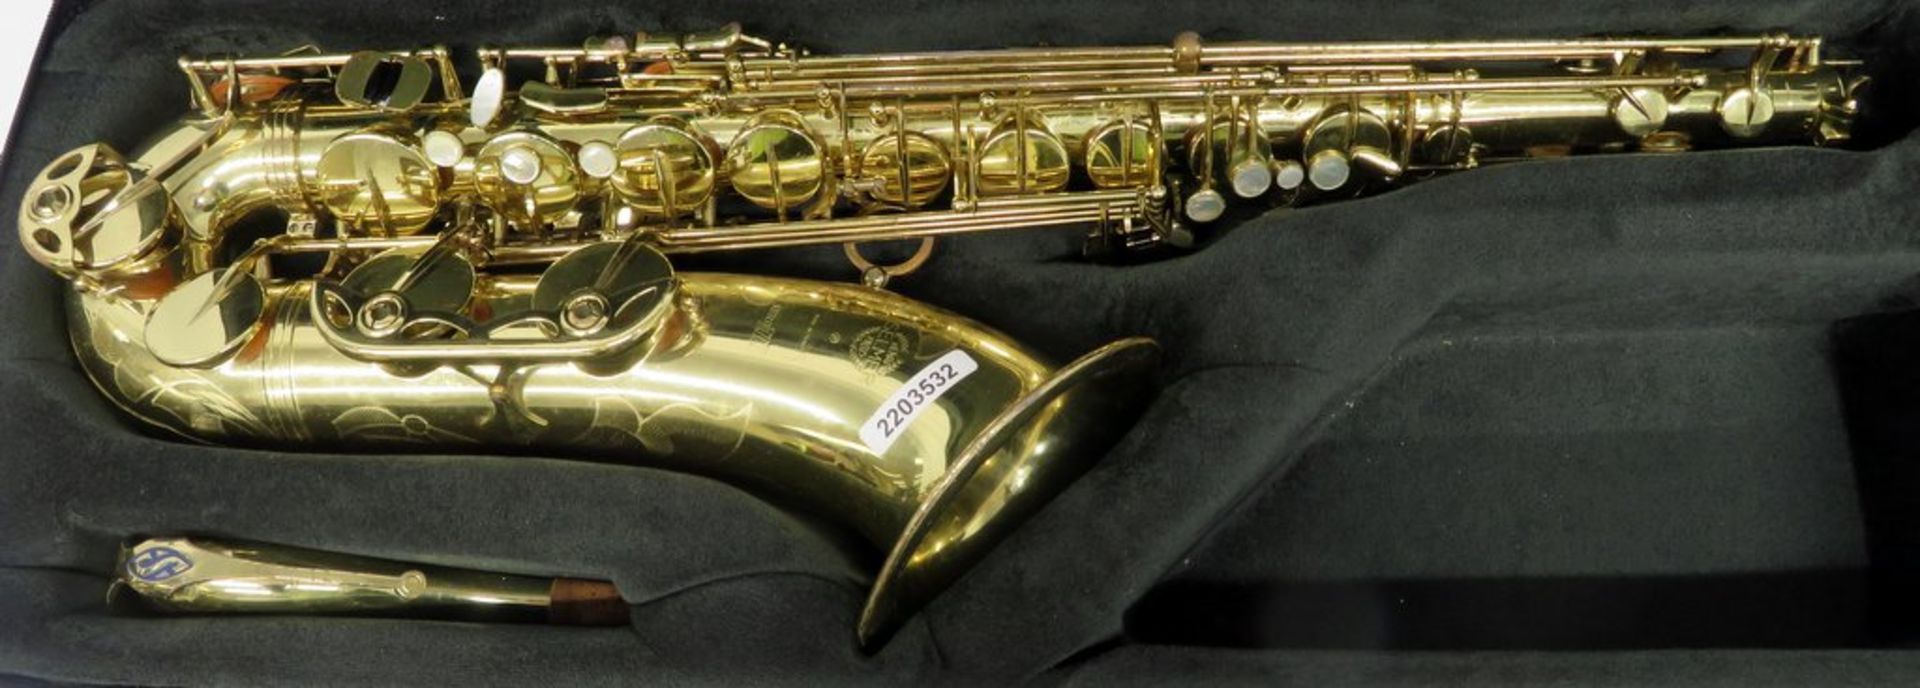 Henri Selmer Super Action 80 Serie 3 Tenor Saxophone With Case. Serial Number: N.657313. - Image 2 of 18